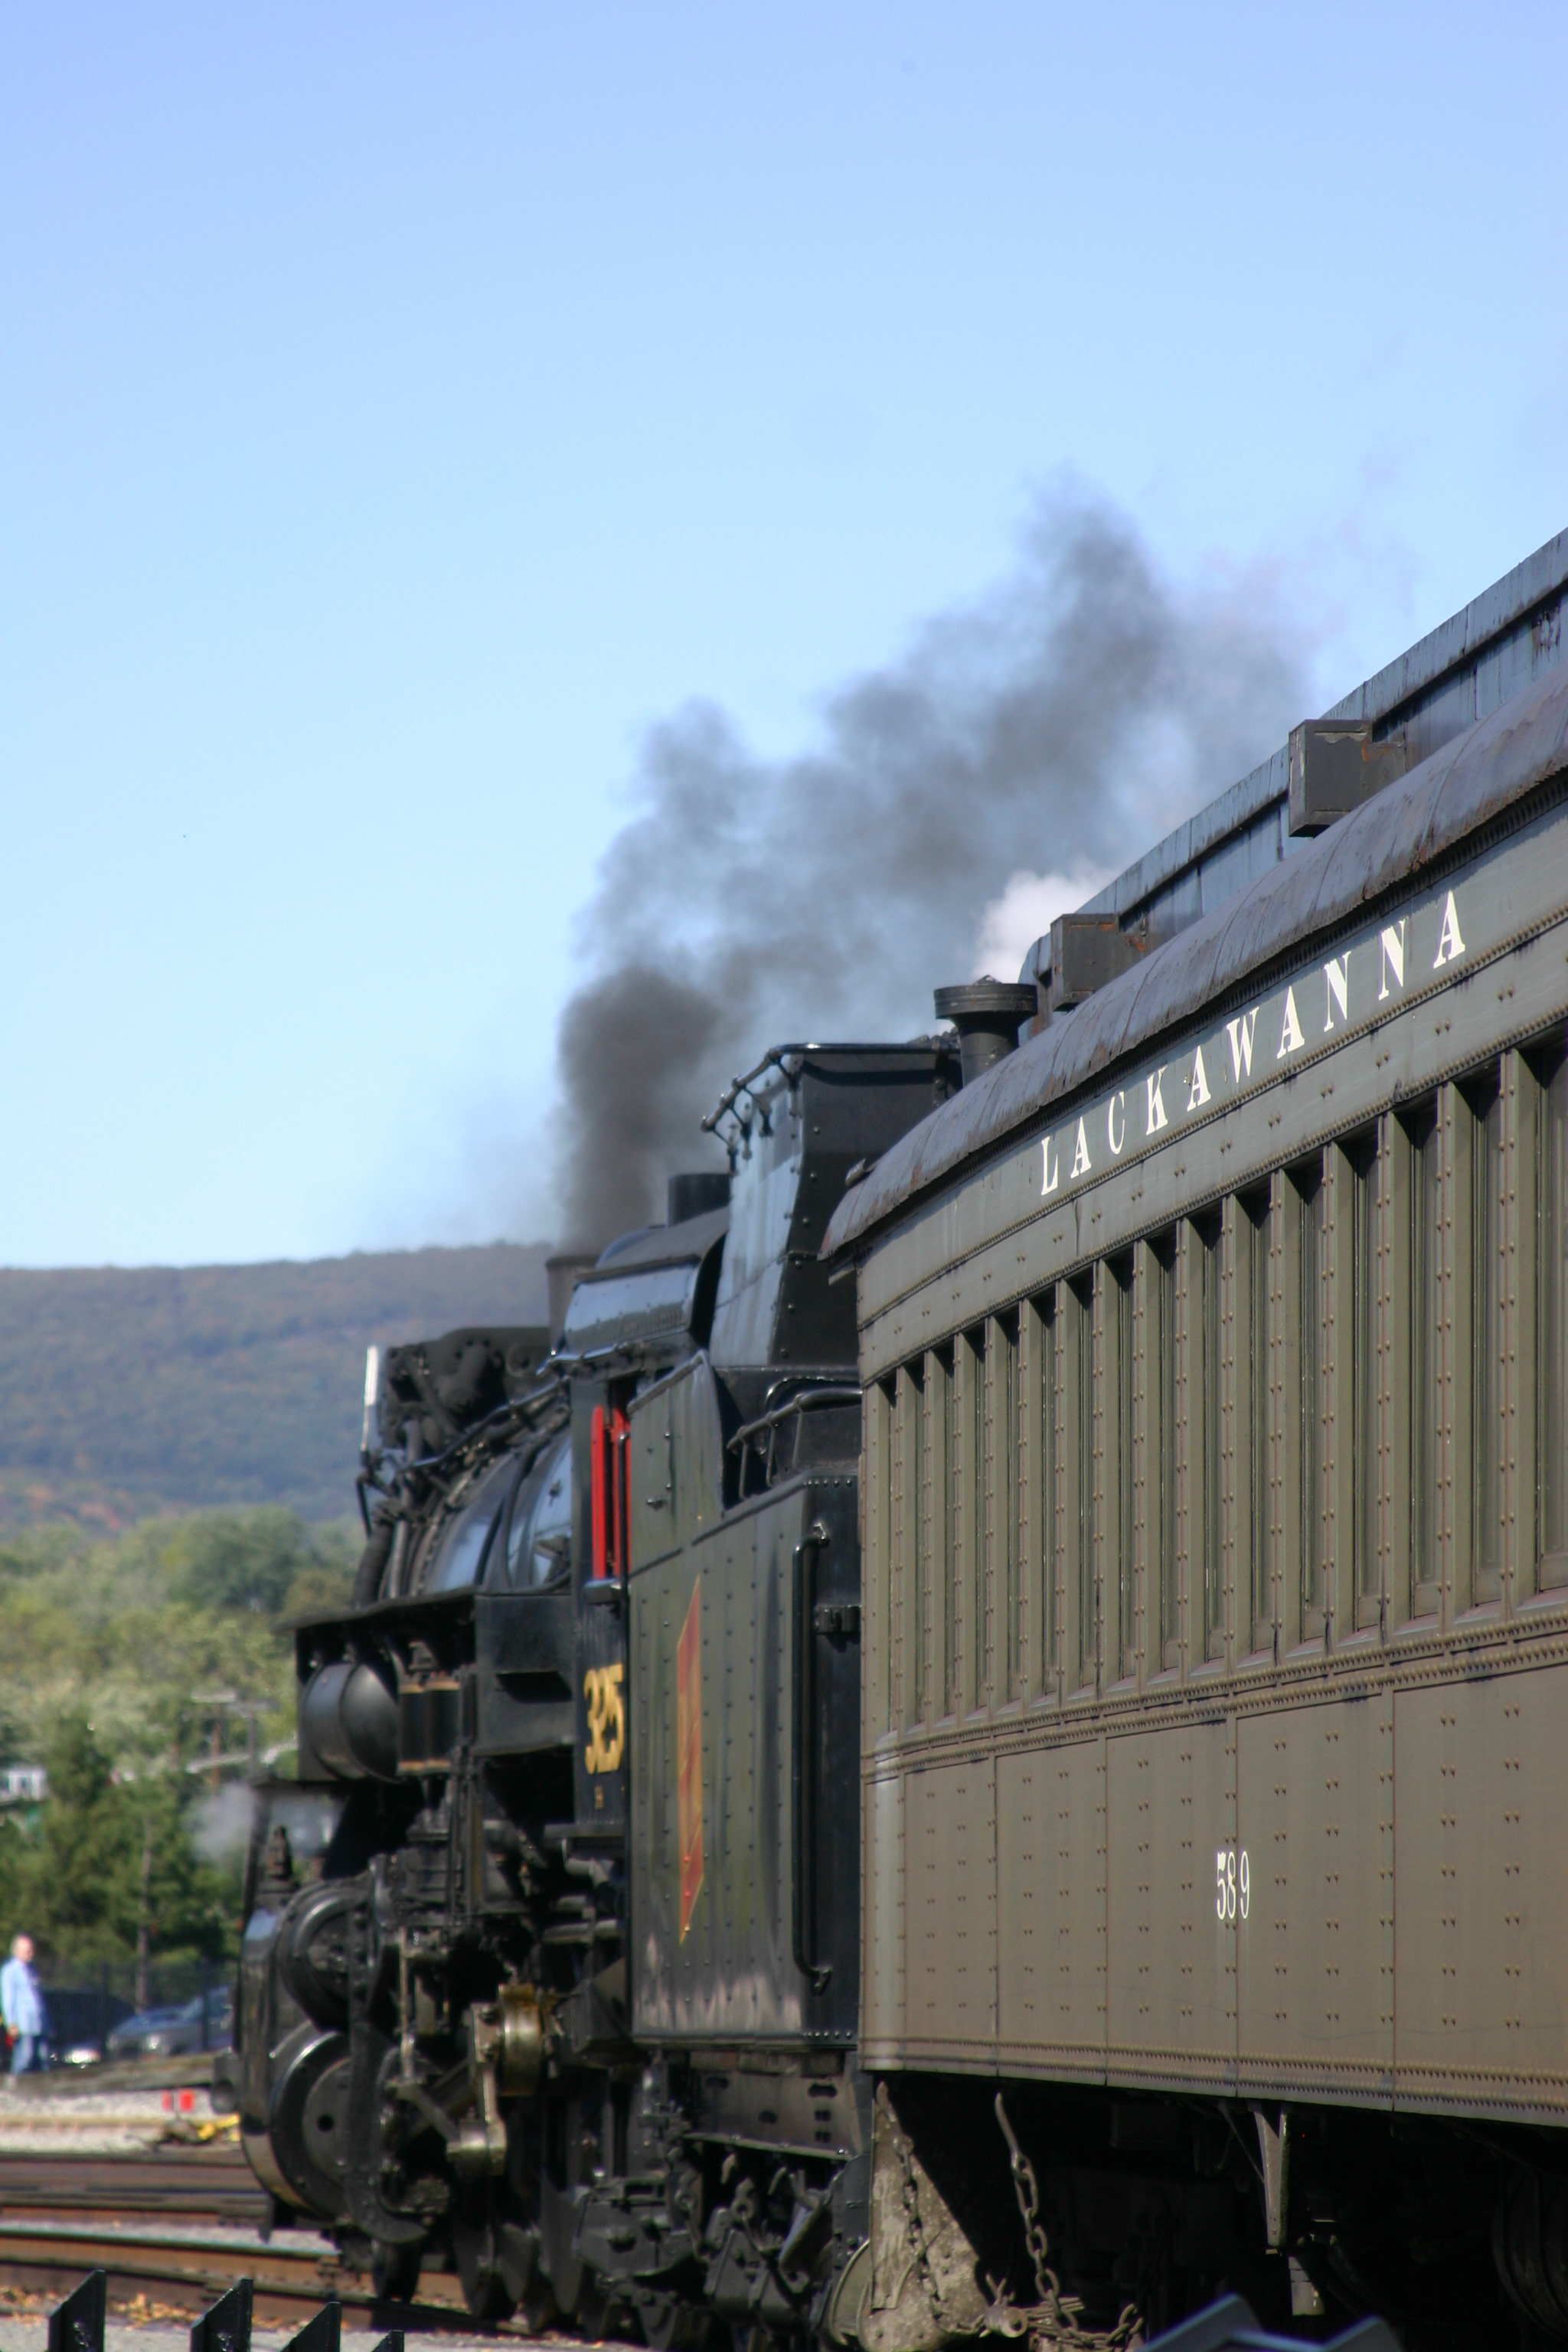 Excursion Train from Steamtown